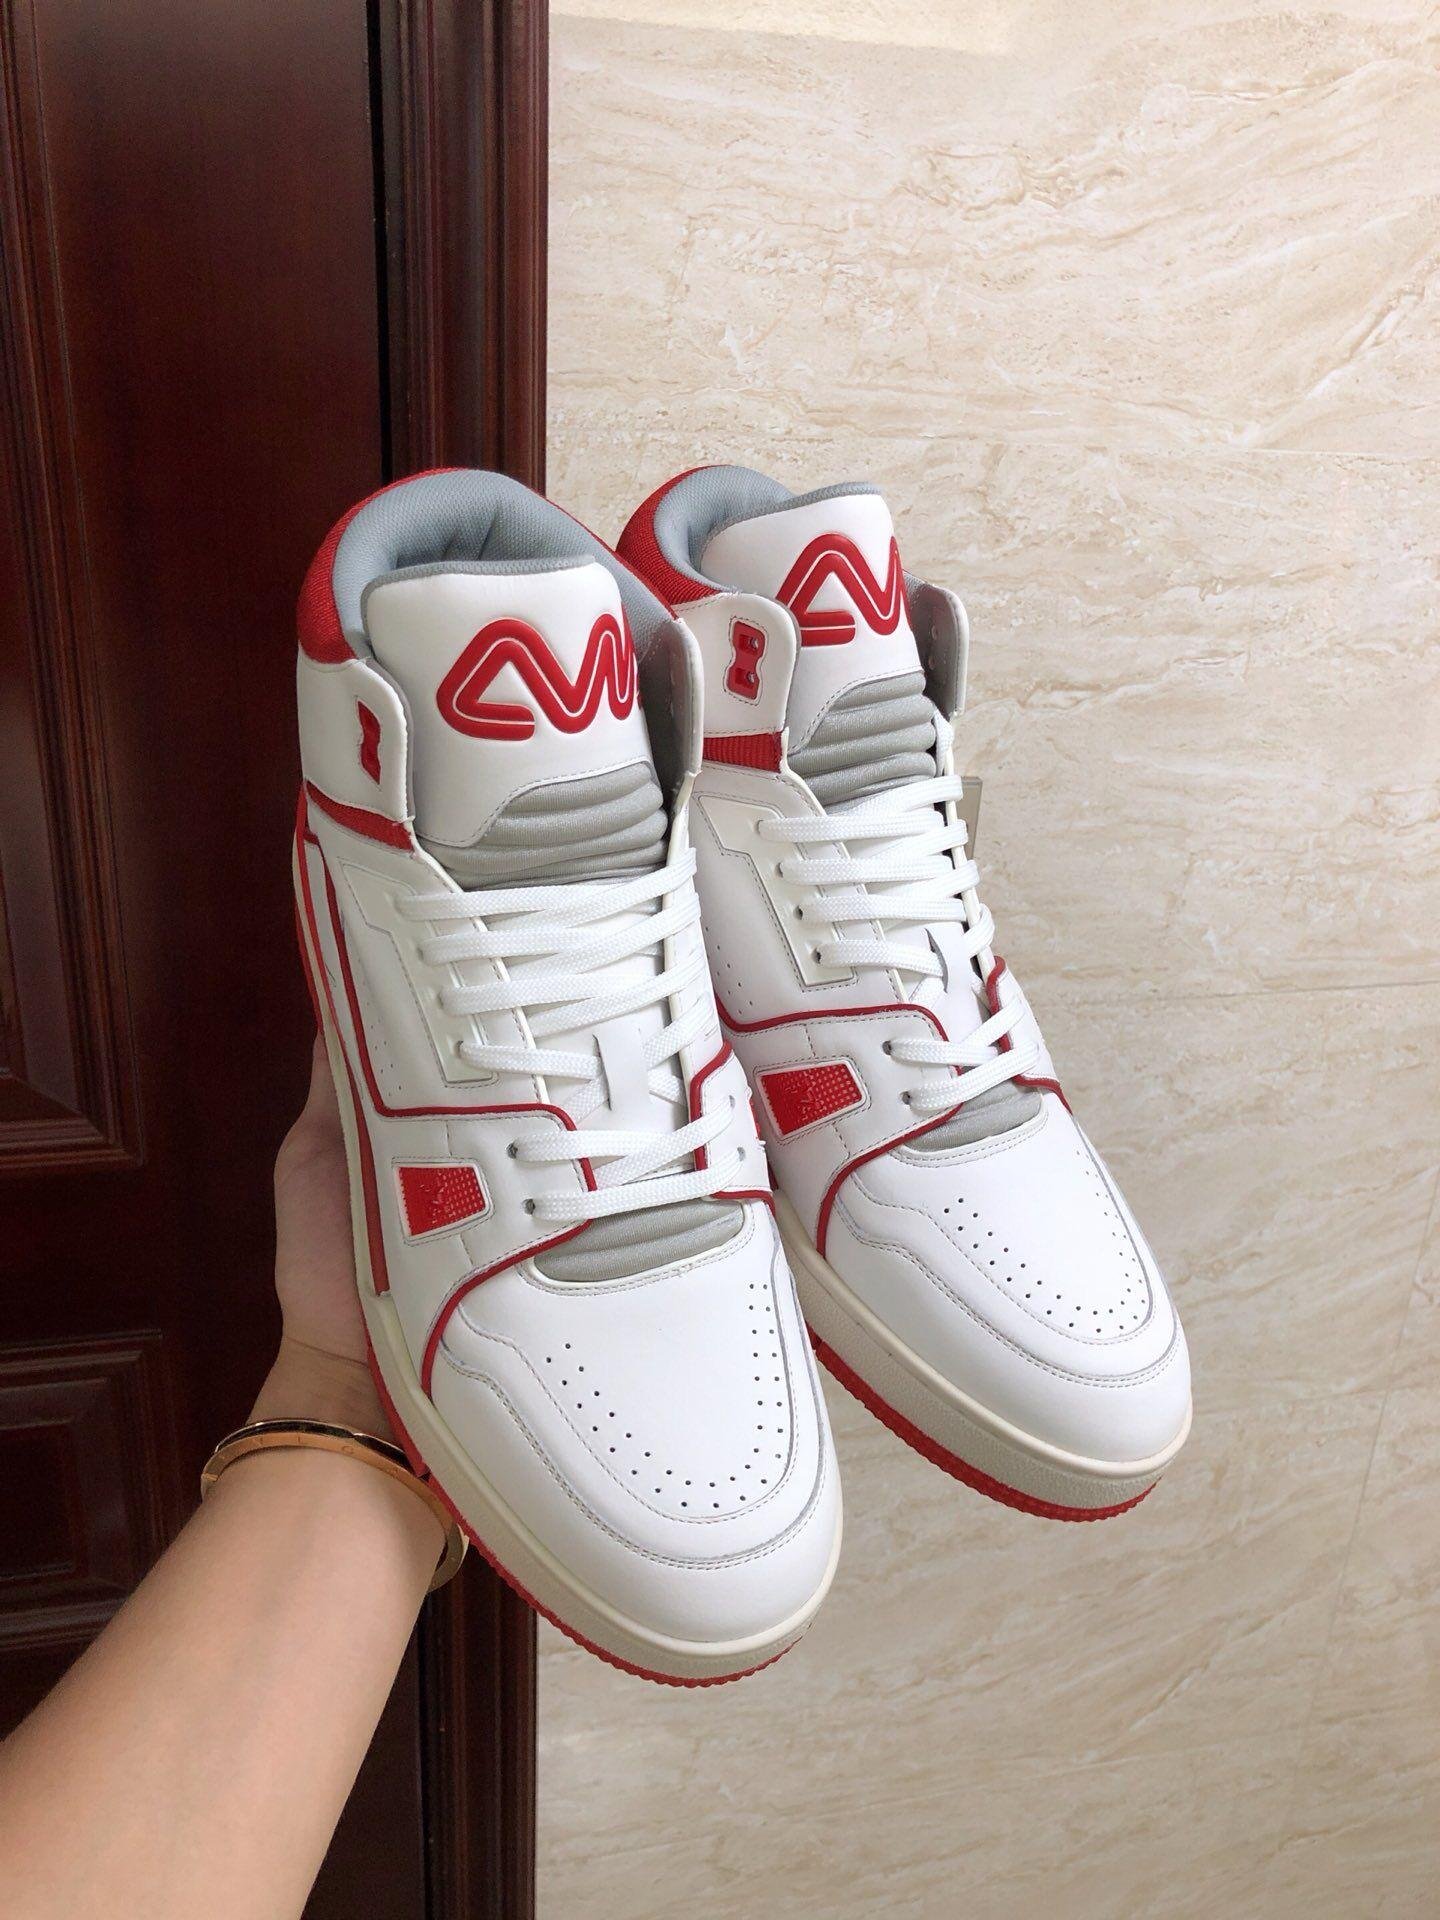 lv trainer sneaker mid top lv sneaker Red lv men shoes1A54IC (China Manufacturer) - Athletic ...